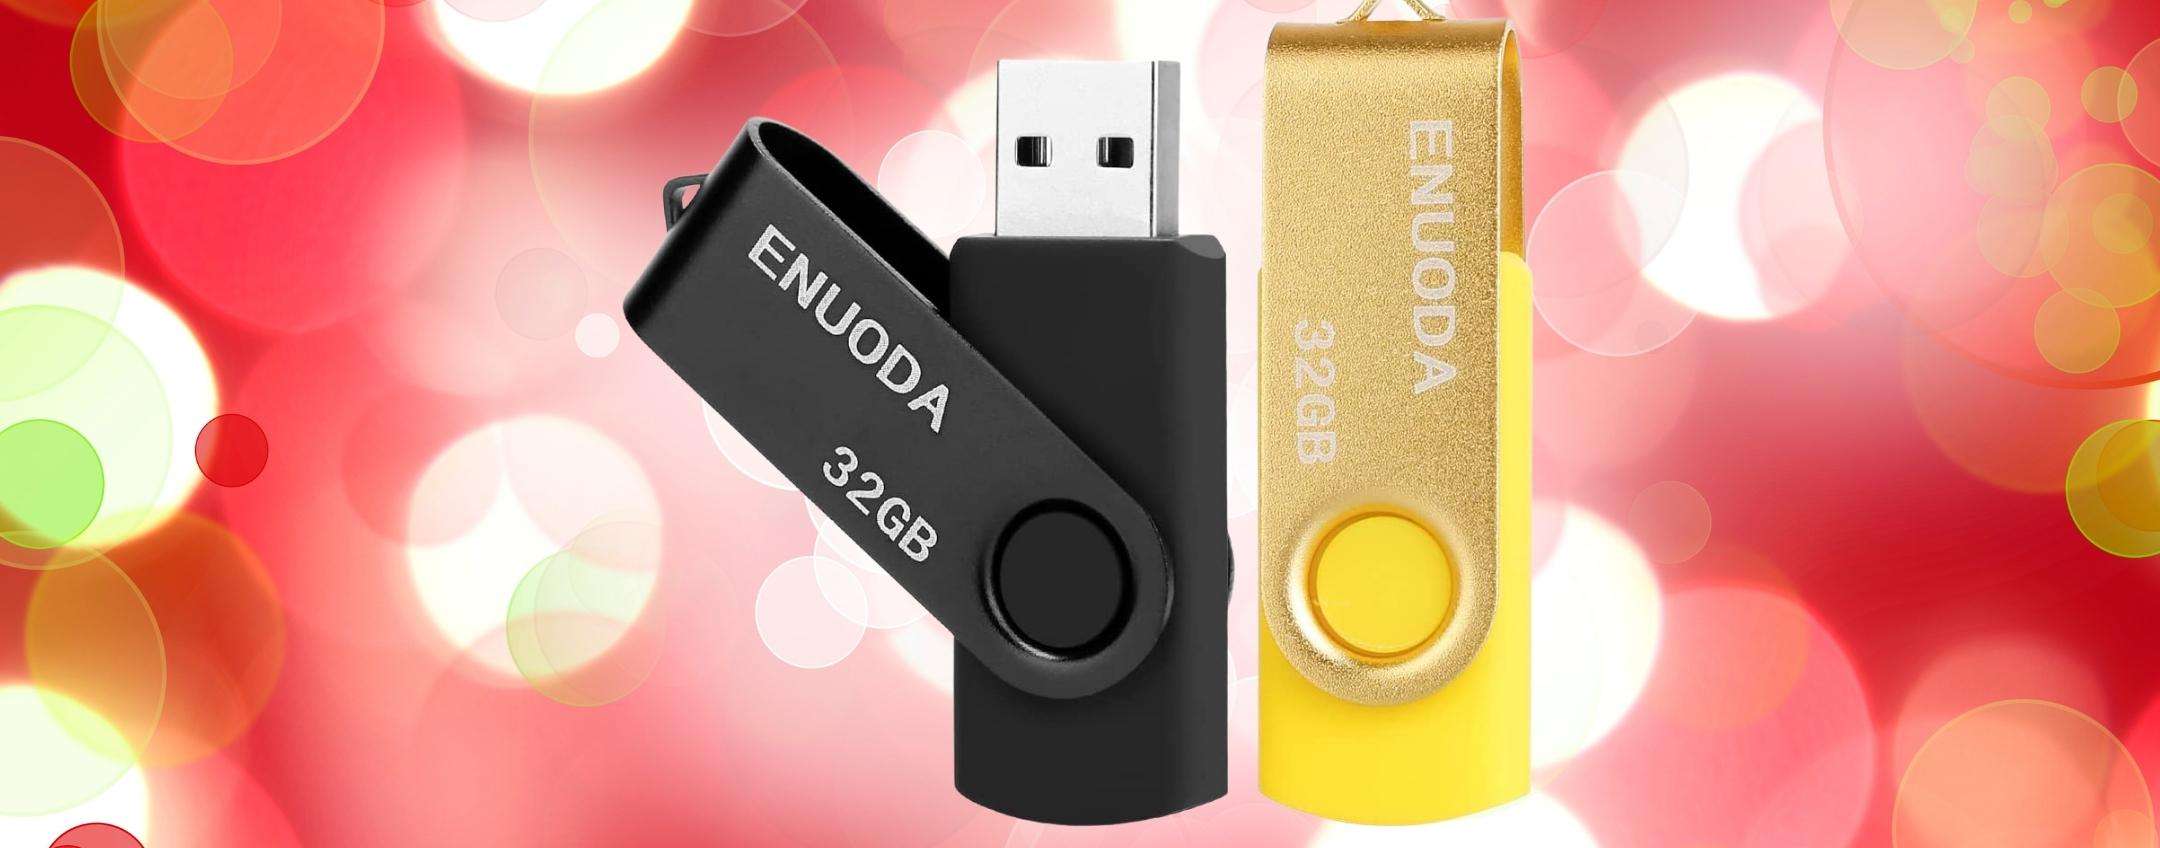 2 USB storage, 64 GB, CHEAP in PURE STATE (10 €)